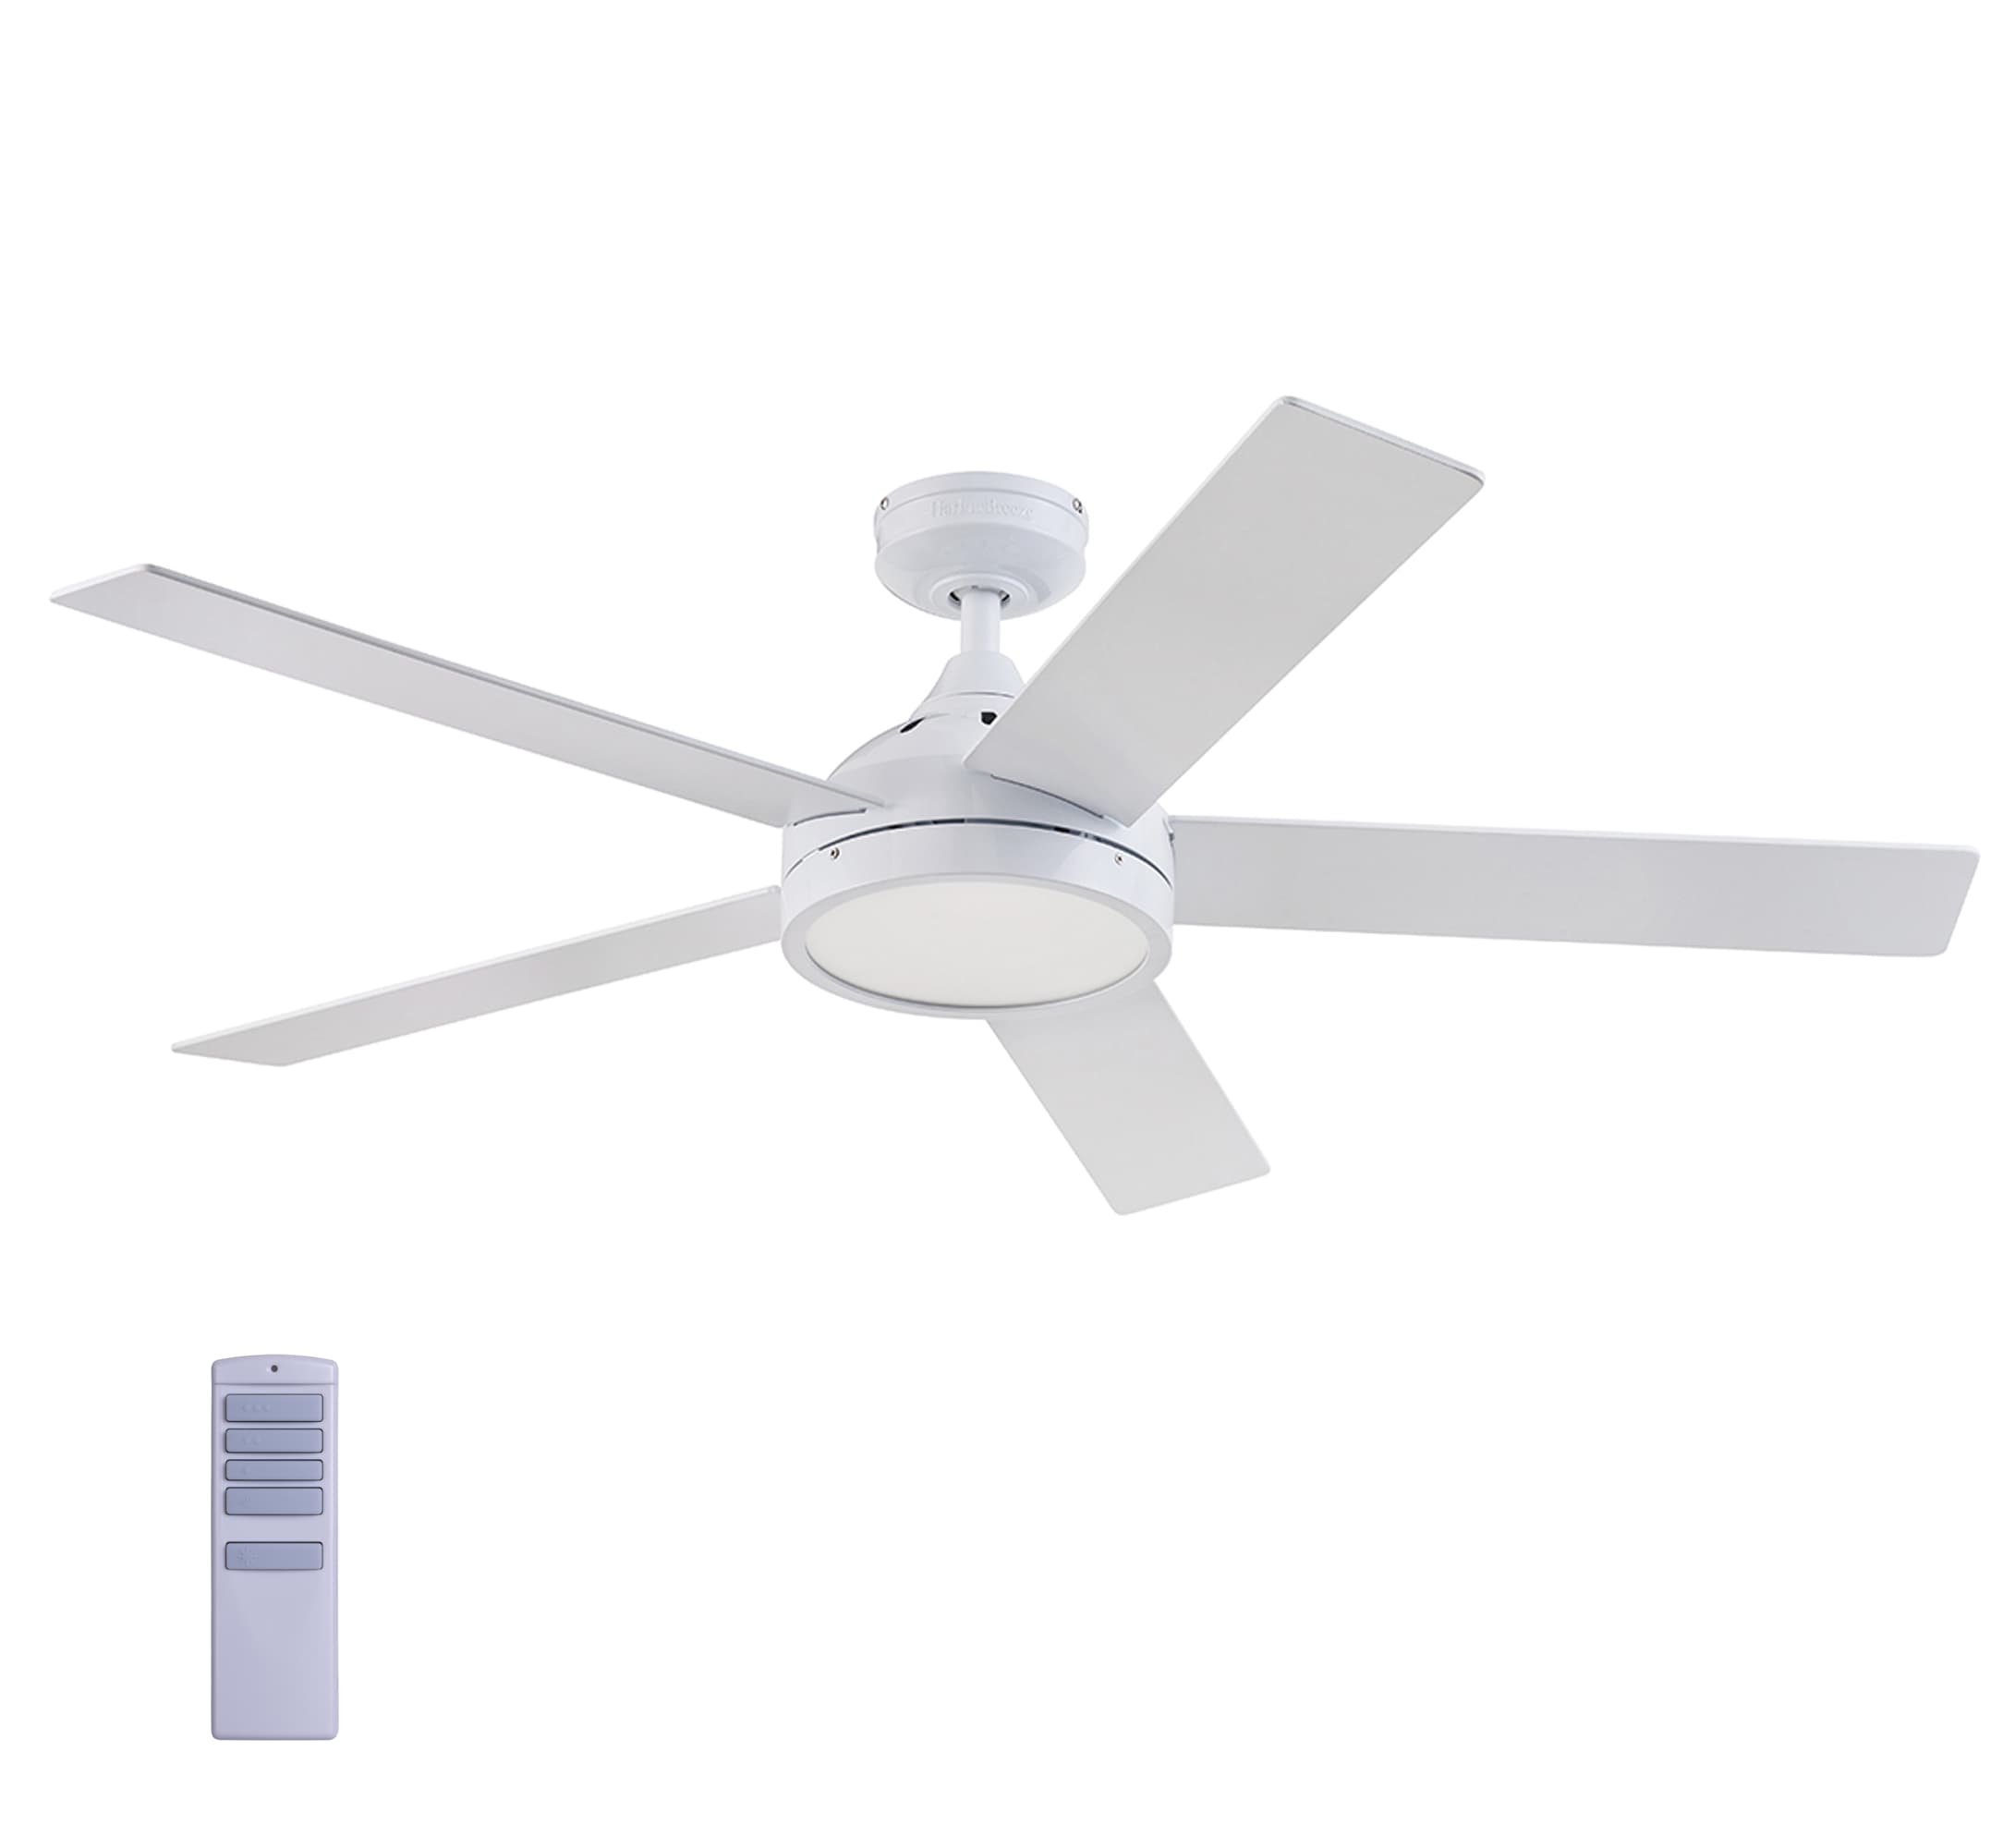 Breeze Camden 52-in White Indoor Ceiling Fan with Light Remote (5-Blade) Ceiling Fans department Lowes.com